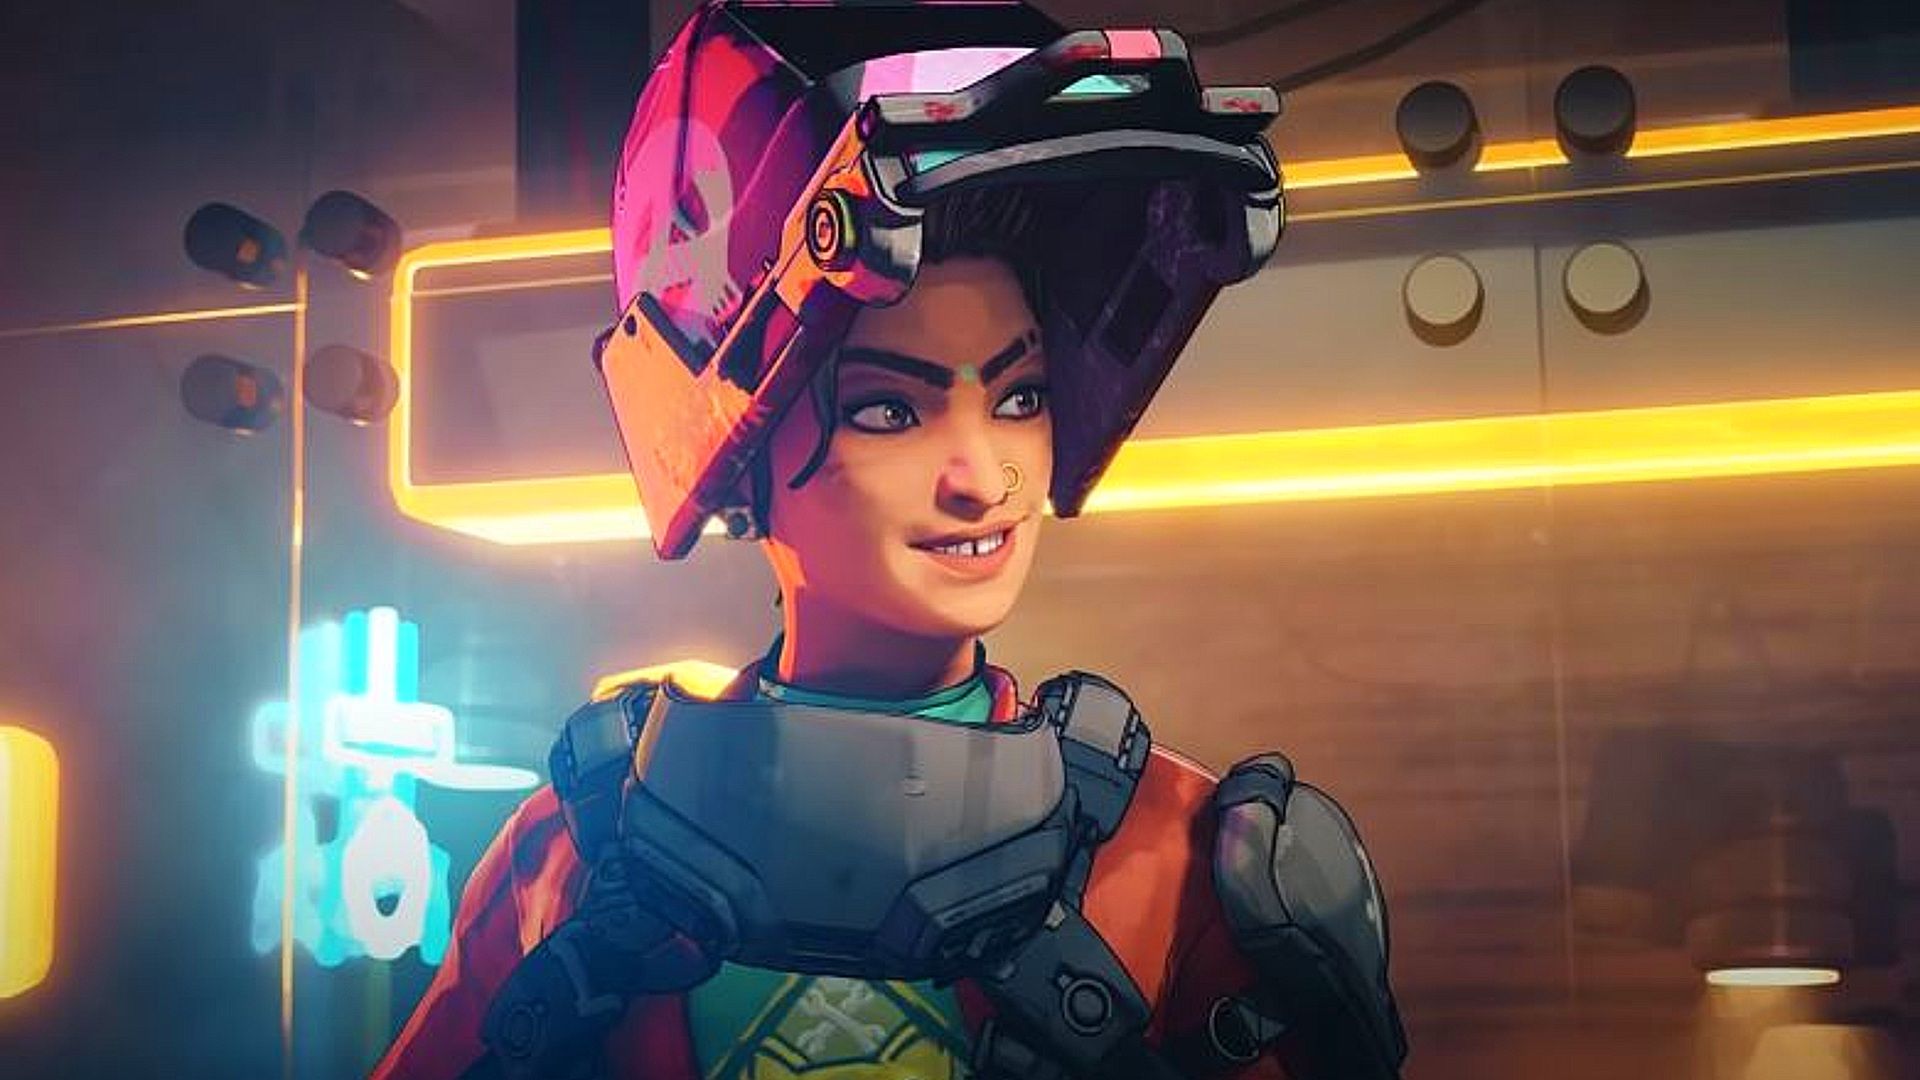 Apex Legends Season 6 introduces crafting and new legend Rampart